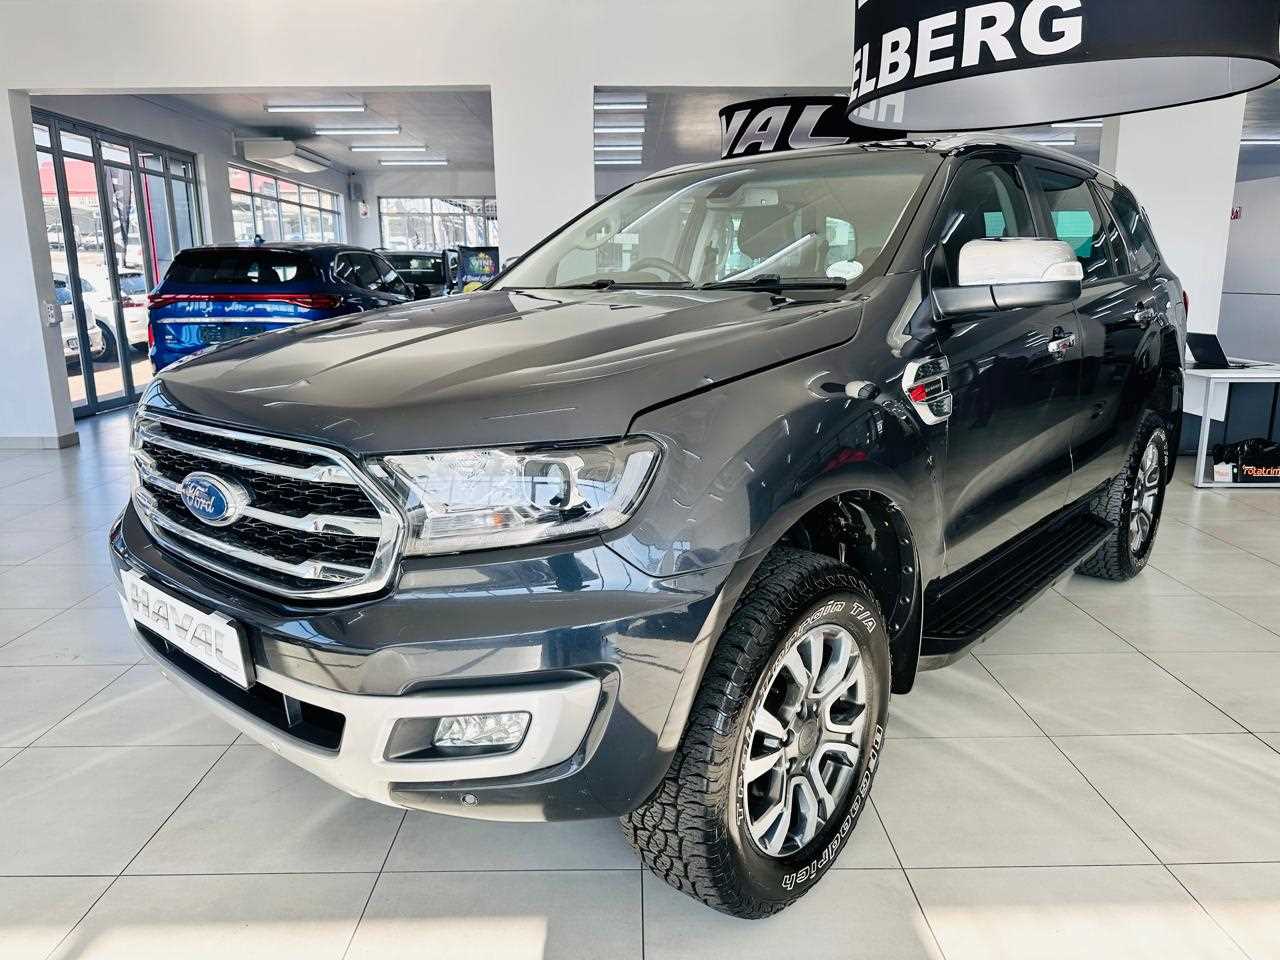 2021 Ford Everest MY21.11 2.0 Turbo Xlt 4X2 At for sale - 337735